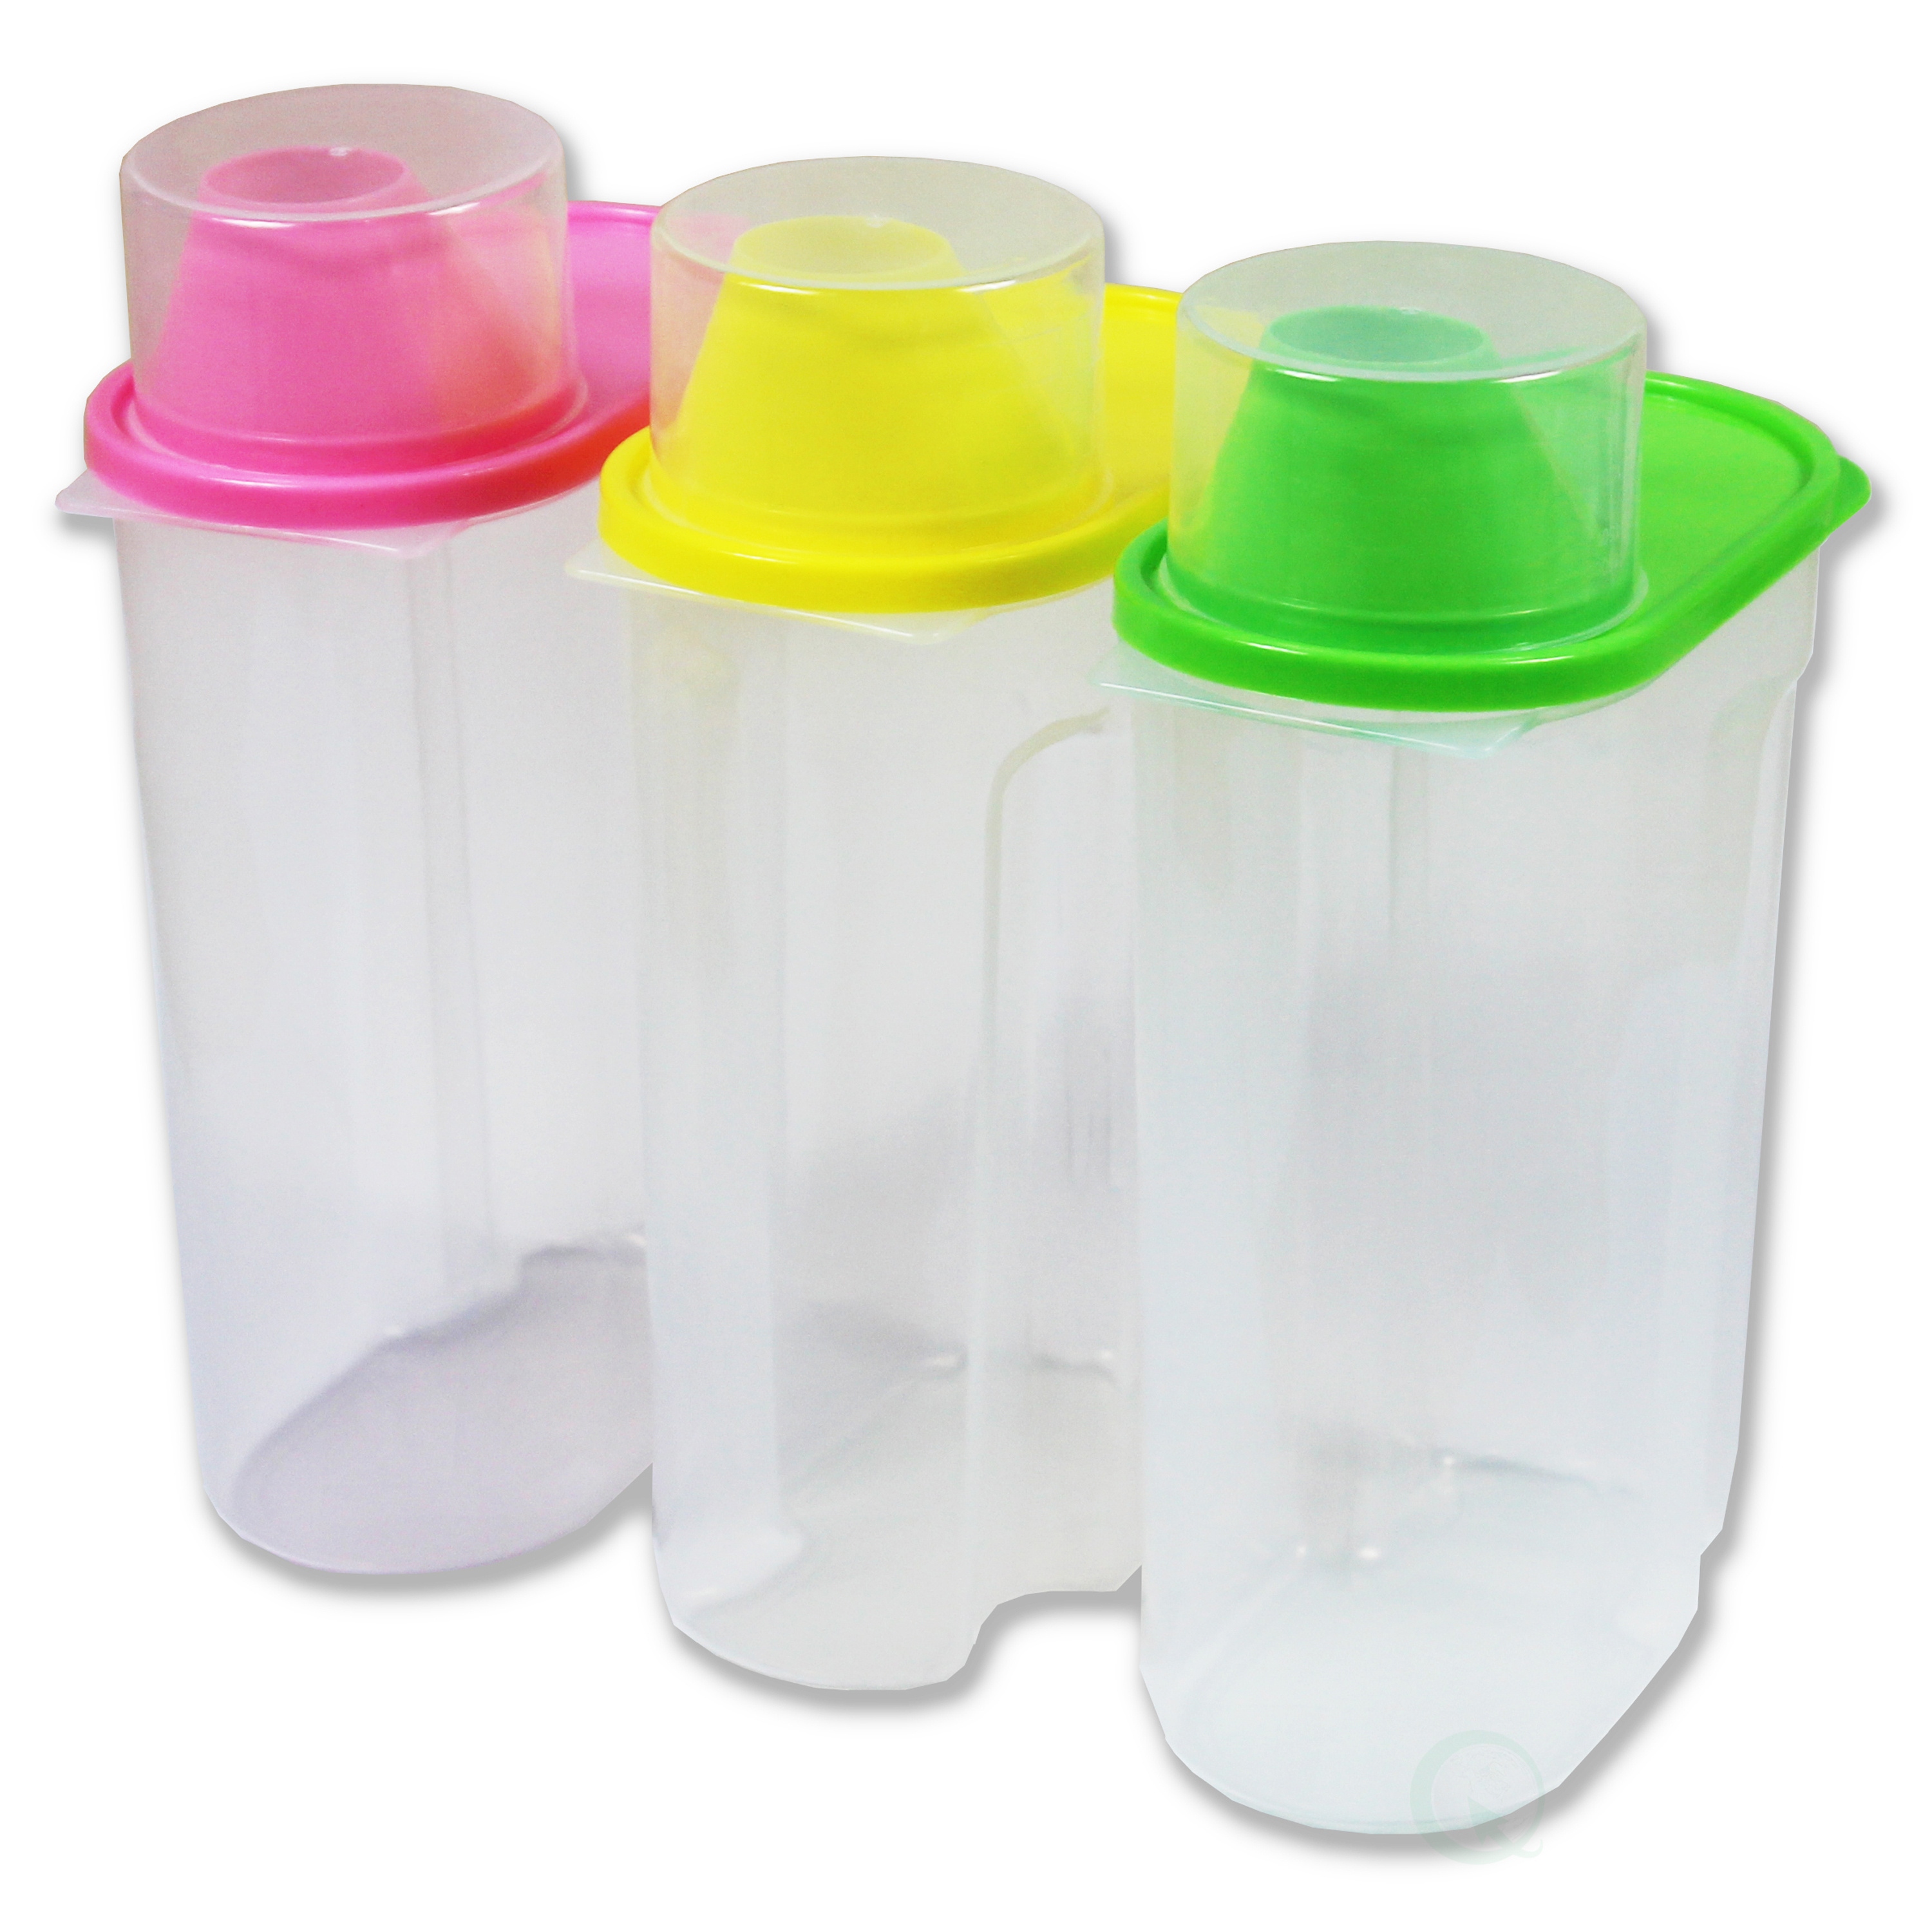 BPA-Free Plastic Food Saver-Kitchen Food Cereal Storage Containers With Graduated Cap - Set Of 3 Small